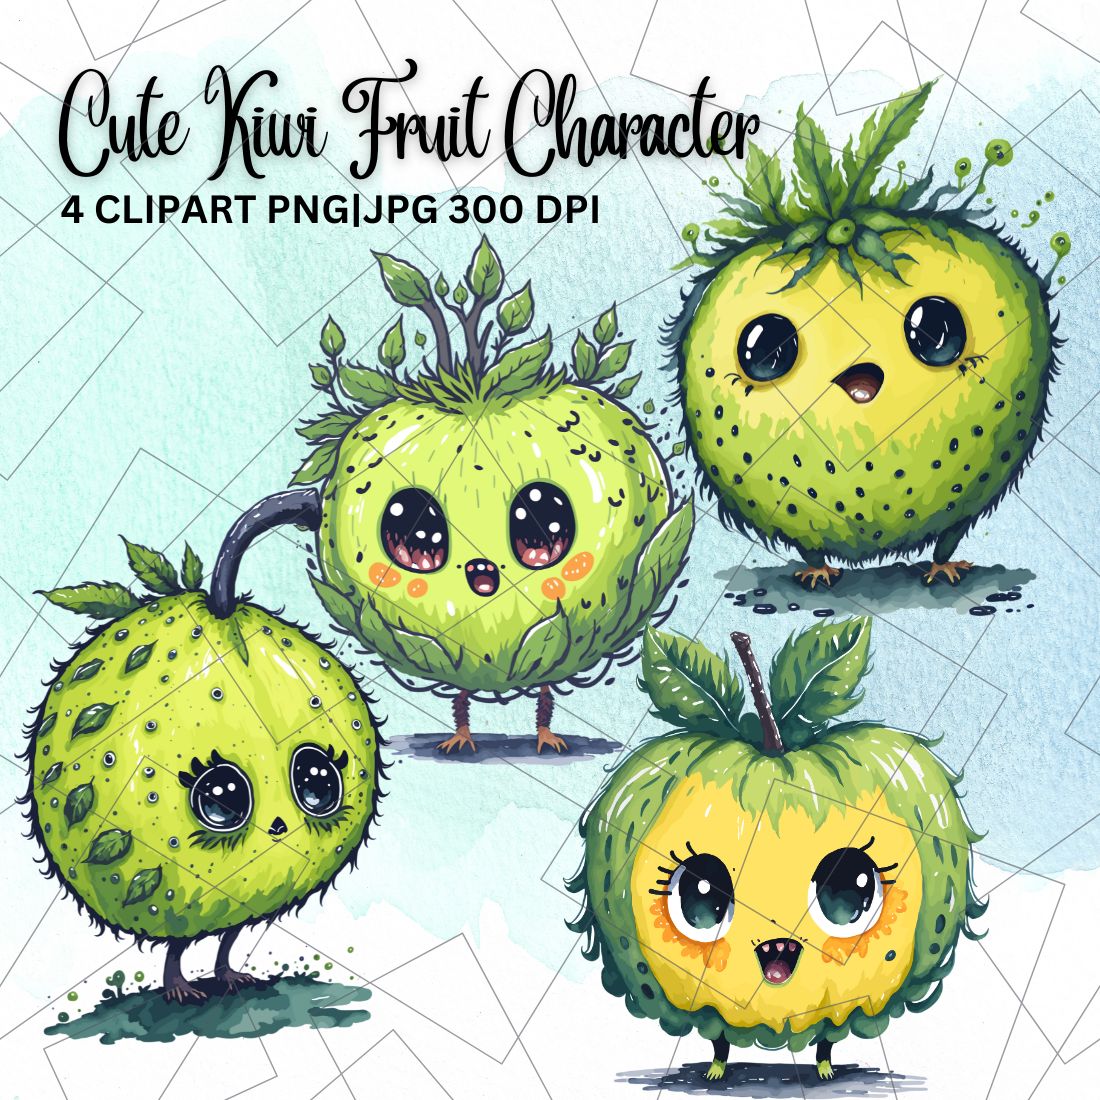 Cute Kiwi Fruit Character Sublimation Clipart cover image.